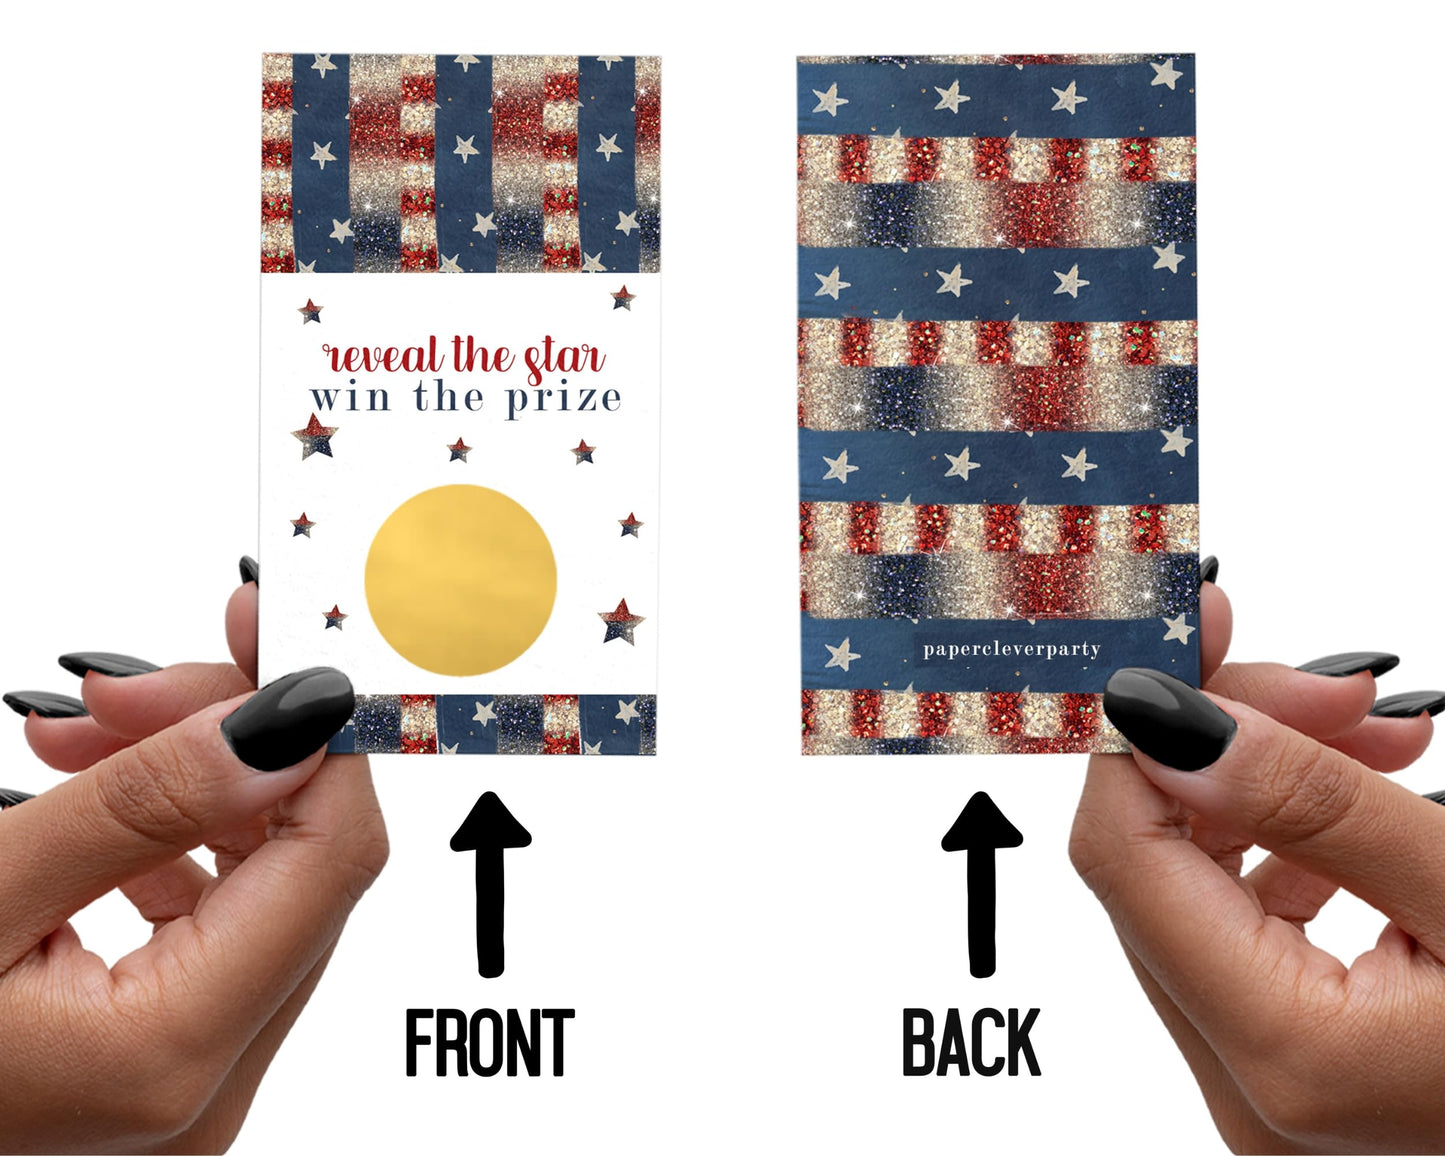 July Fourth Picnic, Barbecue, Summer Events - RedPaper Clever Party